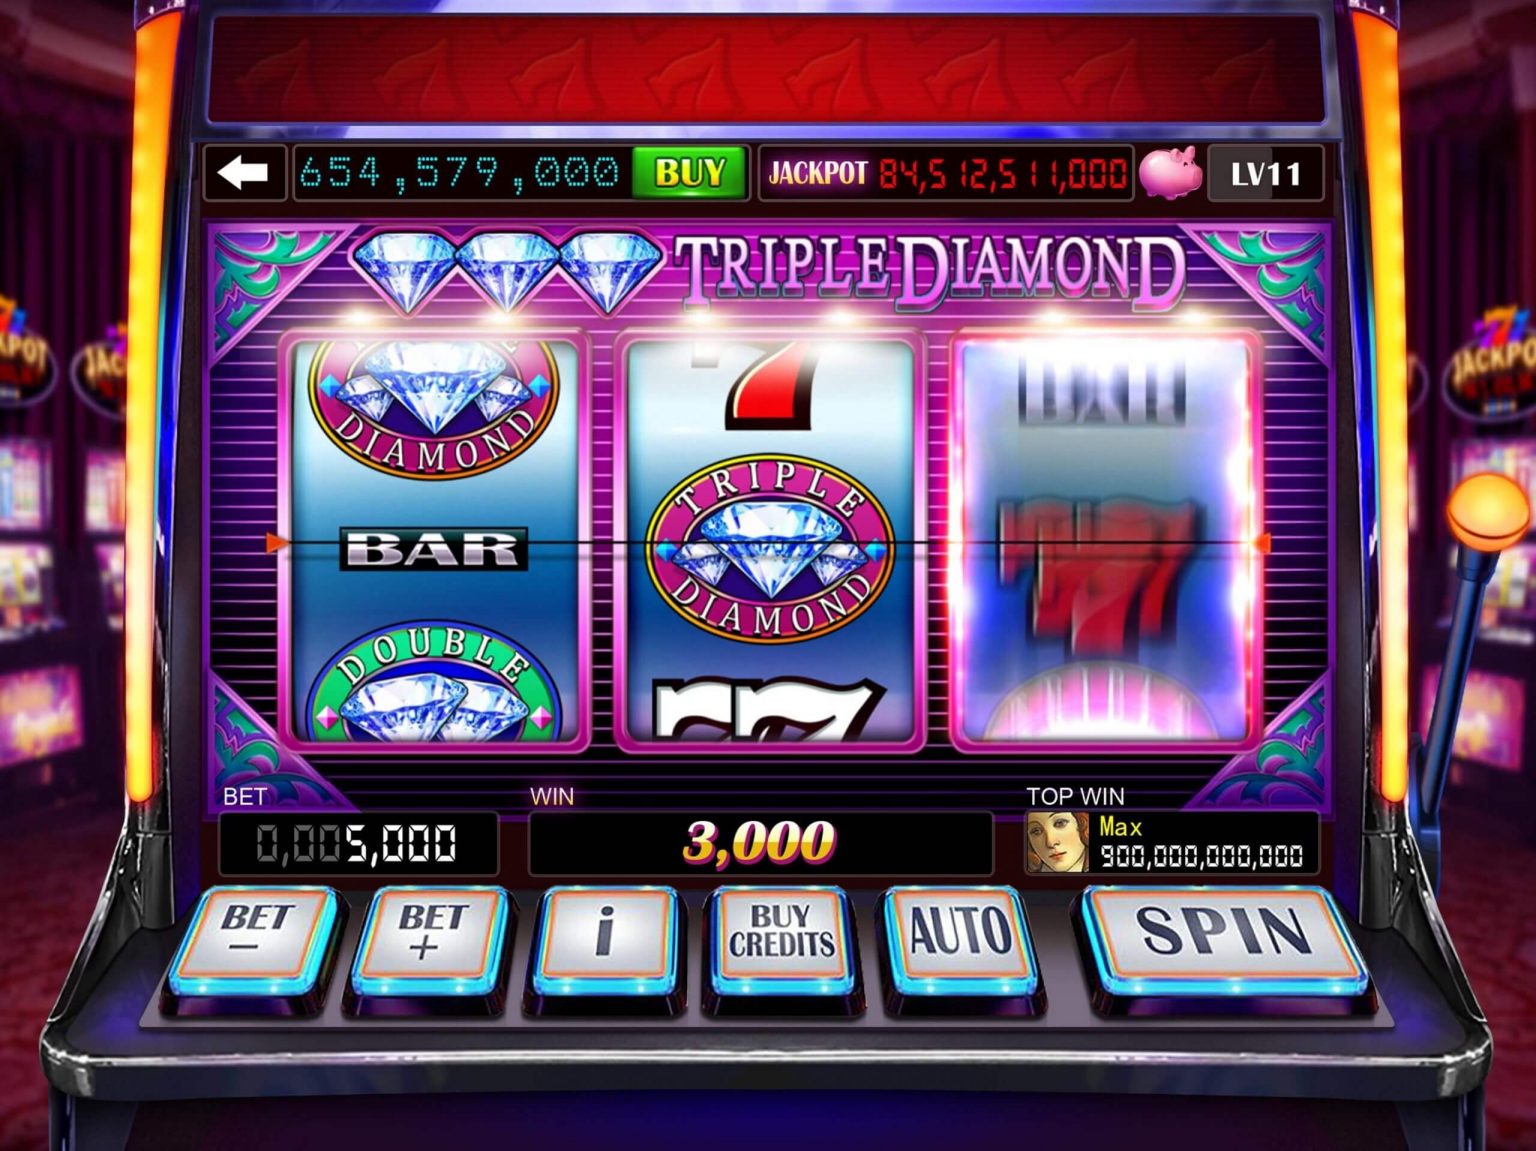 Play slot games for real money: can you play no deposit and win